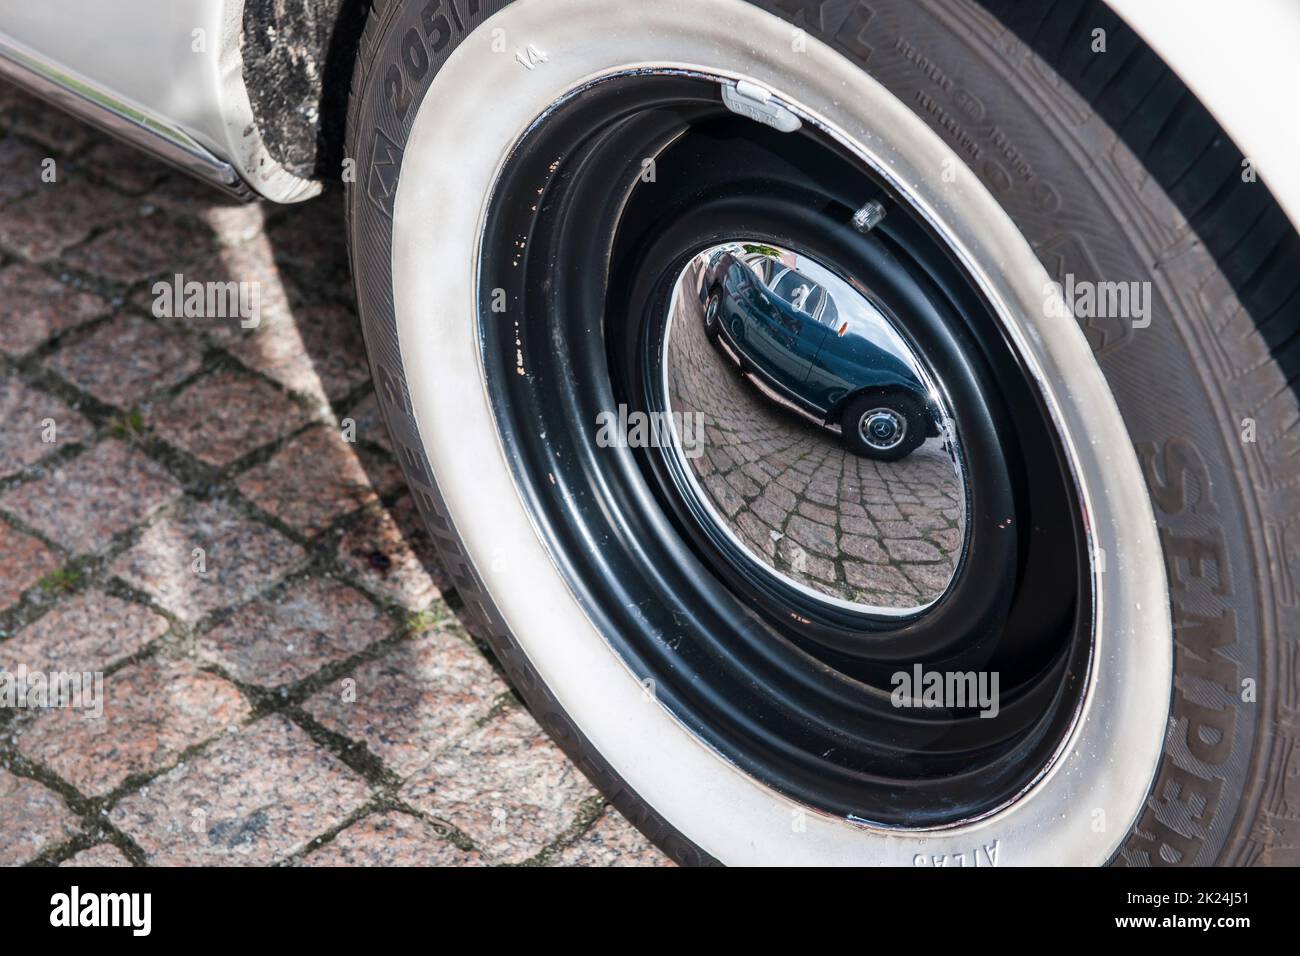 Close-up view of a vintage car tire with a chrome-plated hubcap and the mirror image of another German vintage car that can be seen in it at the annua Stock Photo